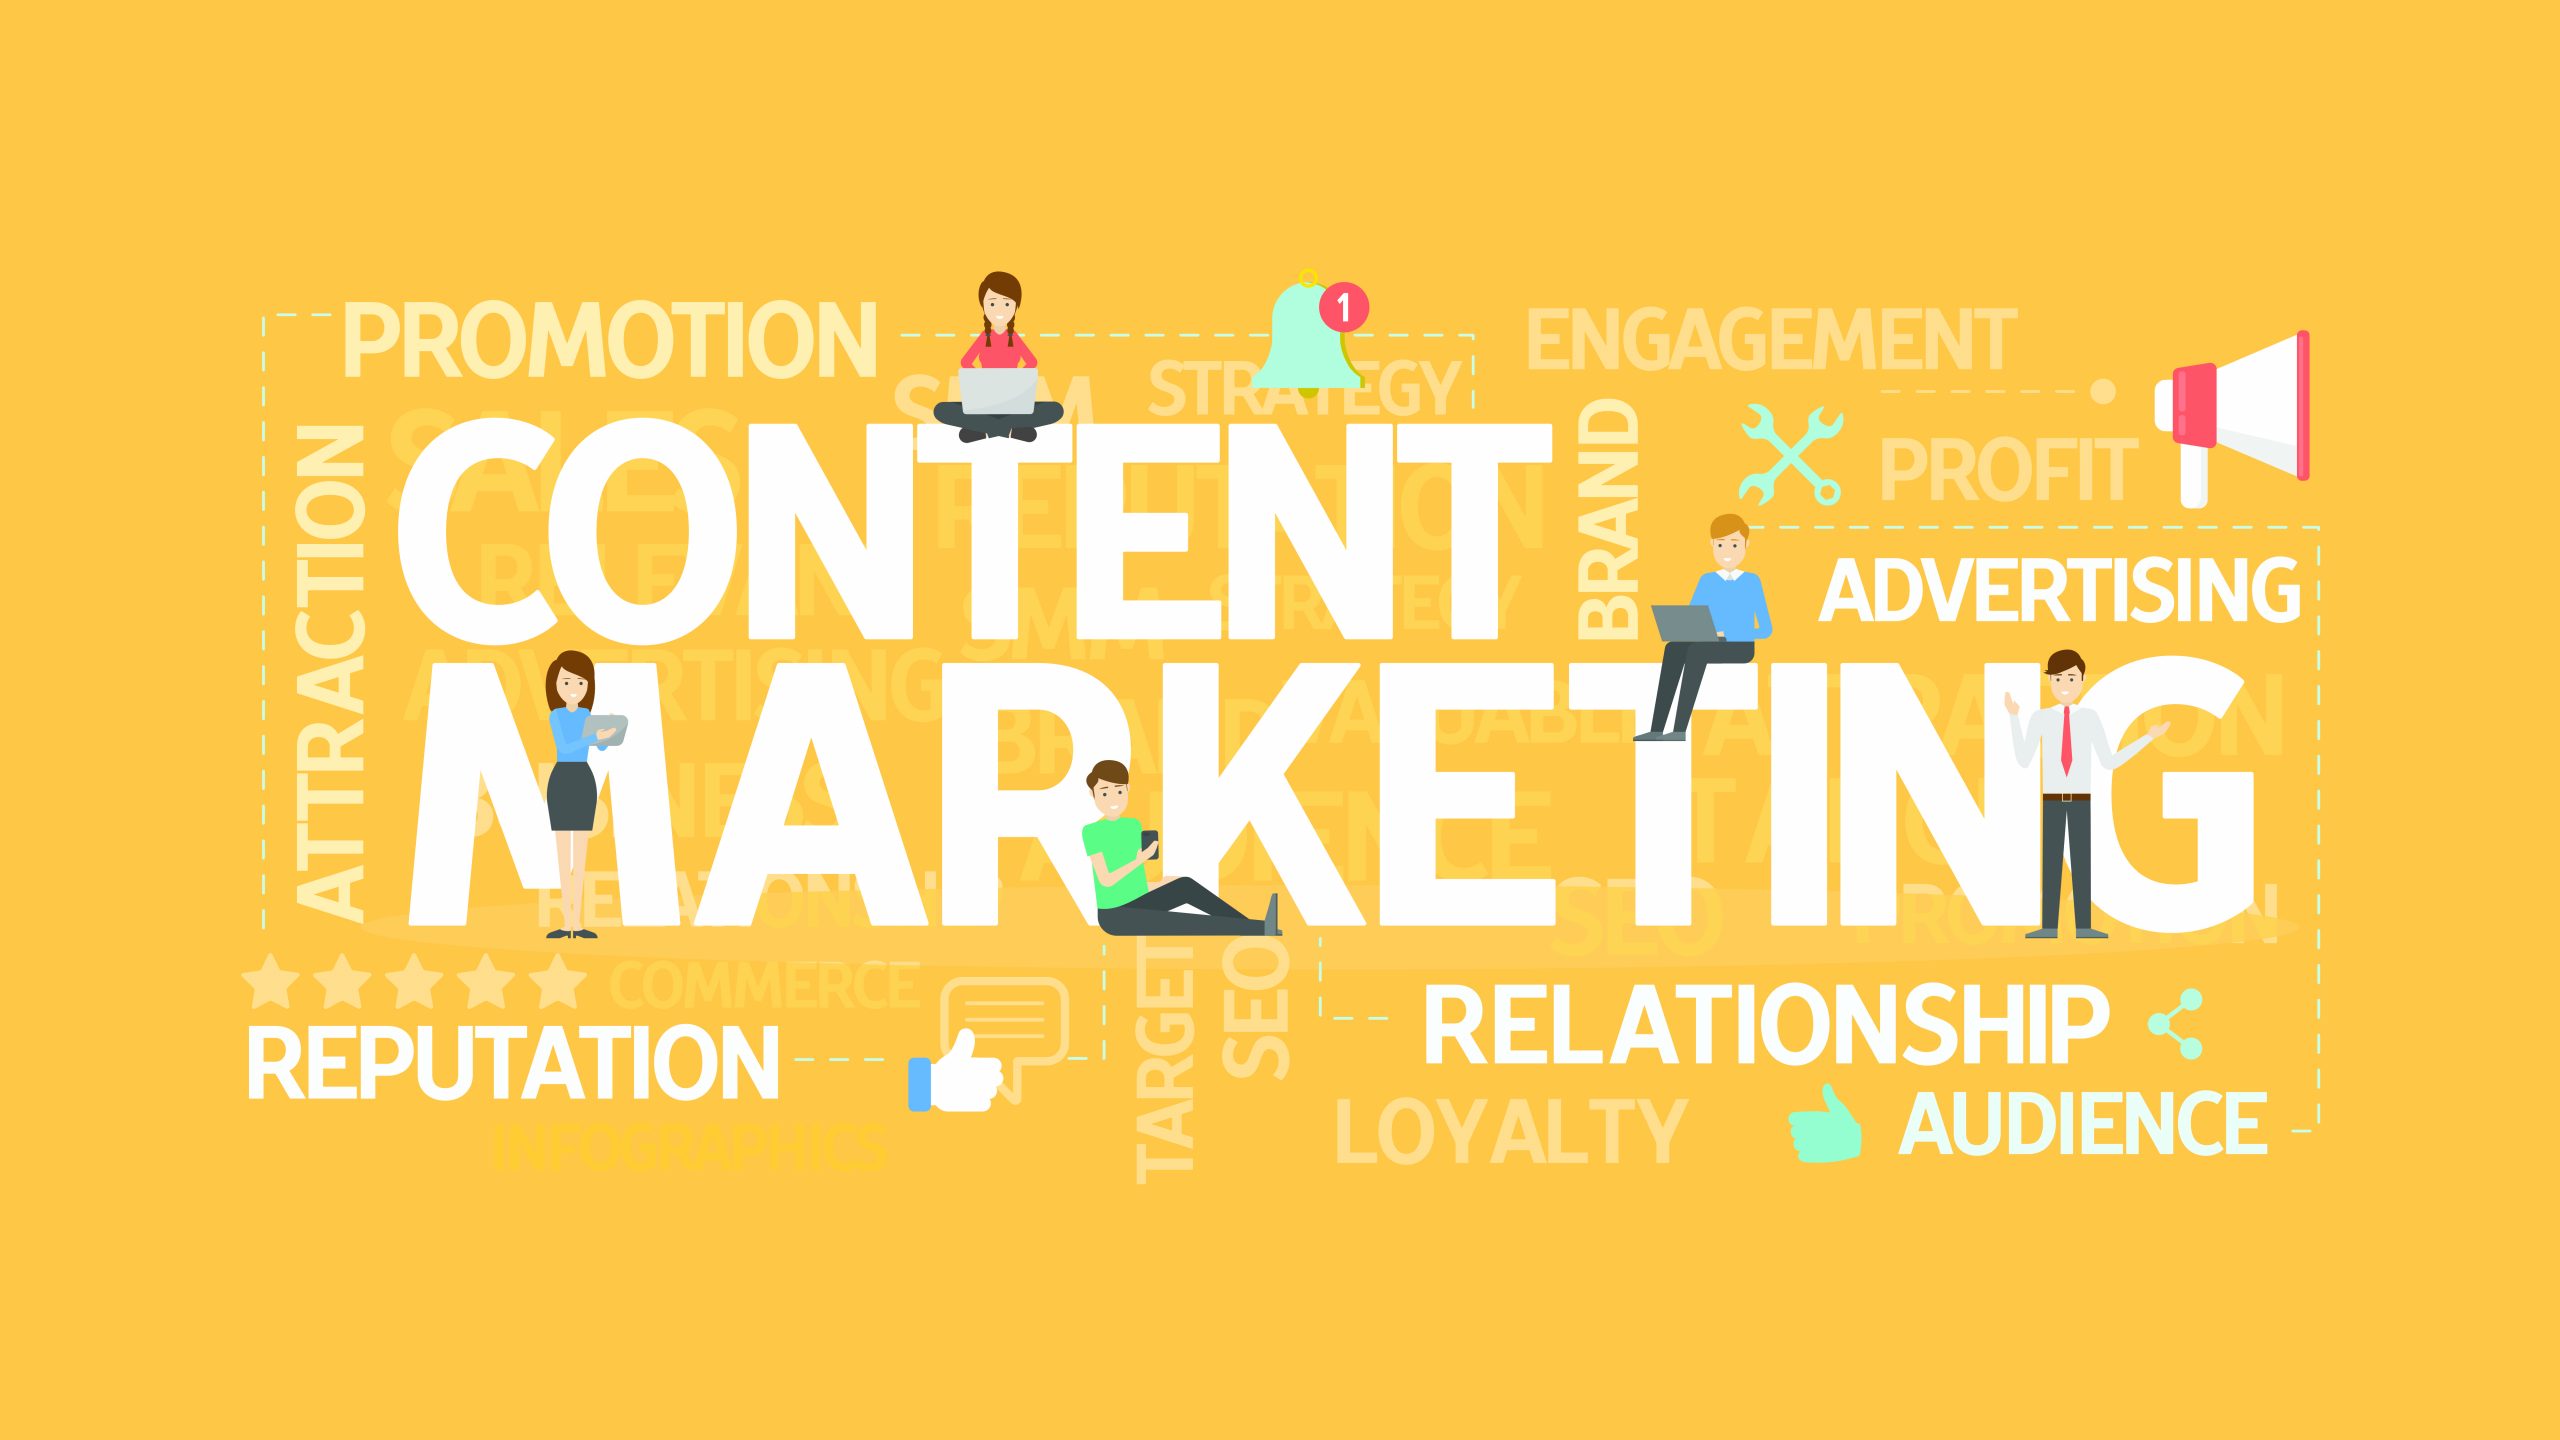 Search engine marketing and content marketing